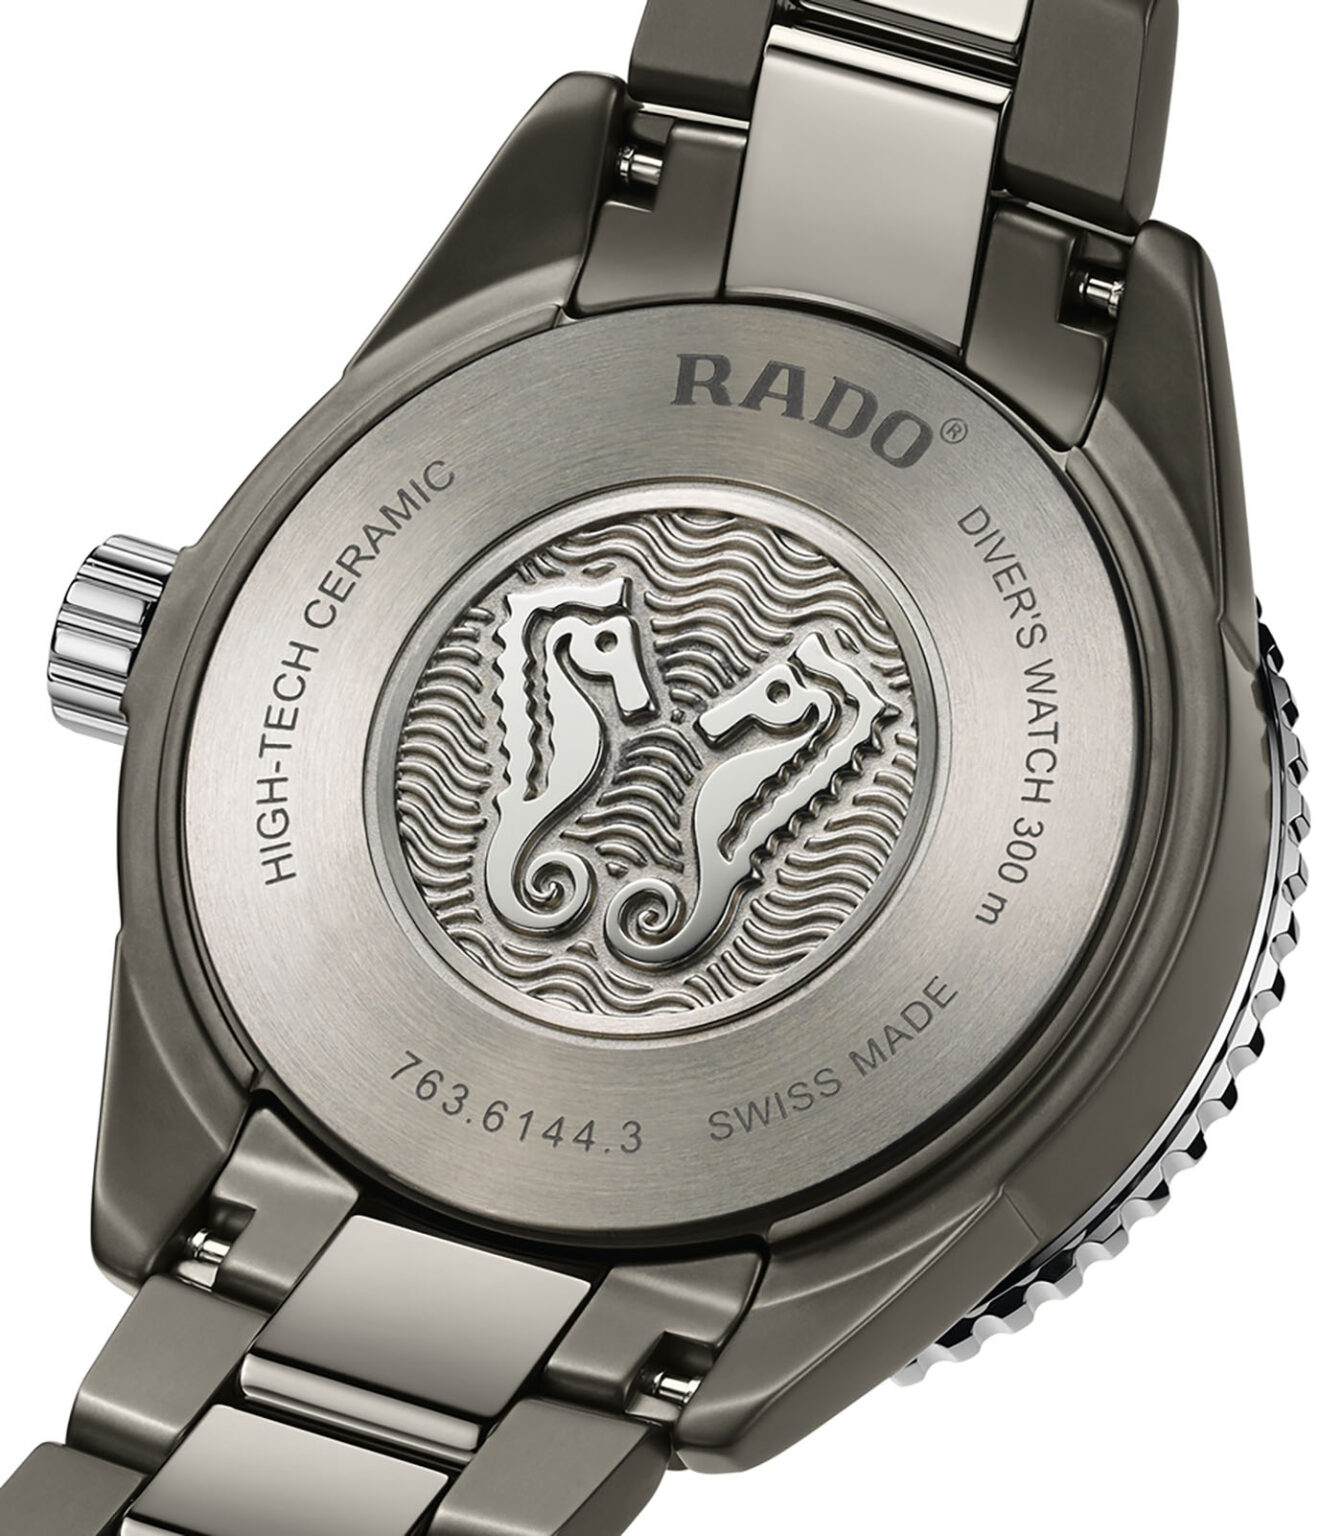 Rado Captain Cook Ceramic diver - An eye-catching titanium case back adorned with two contrasting seahorses on a wave pattern